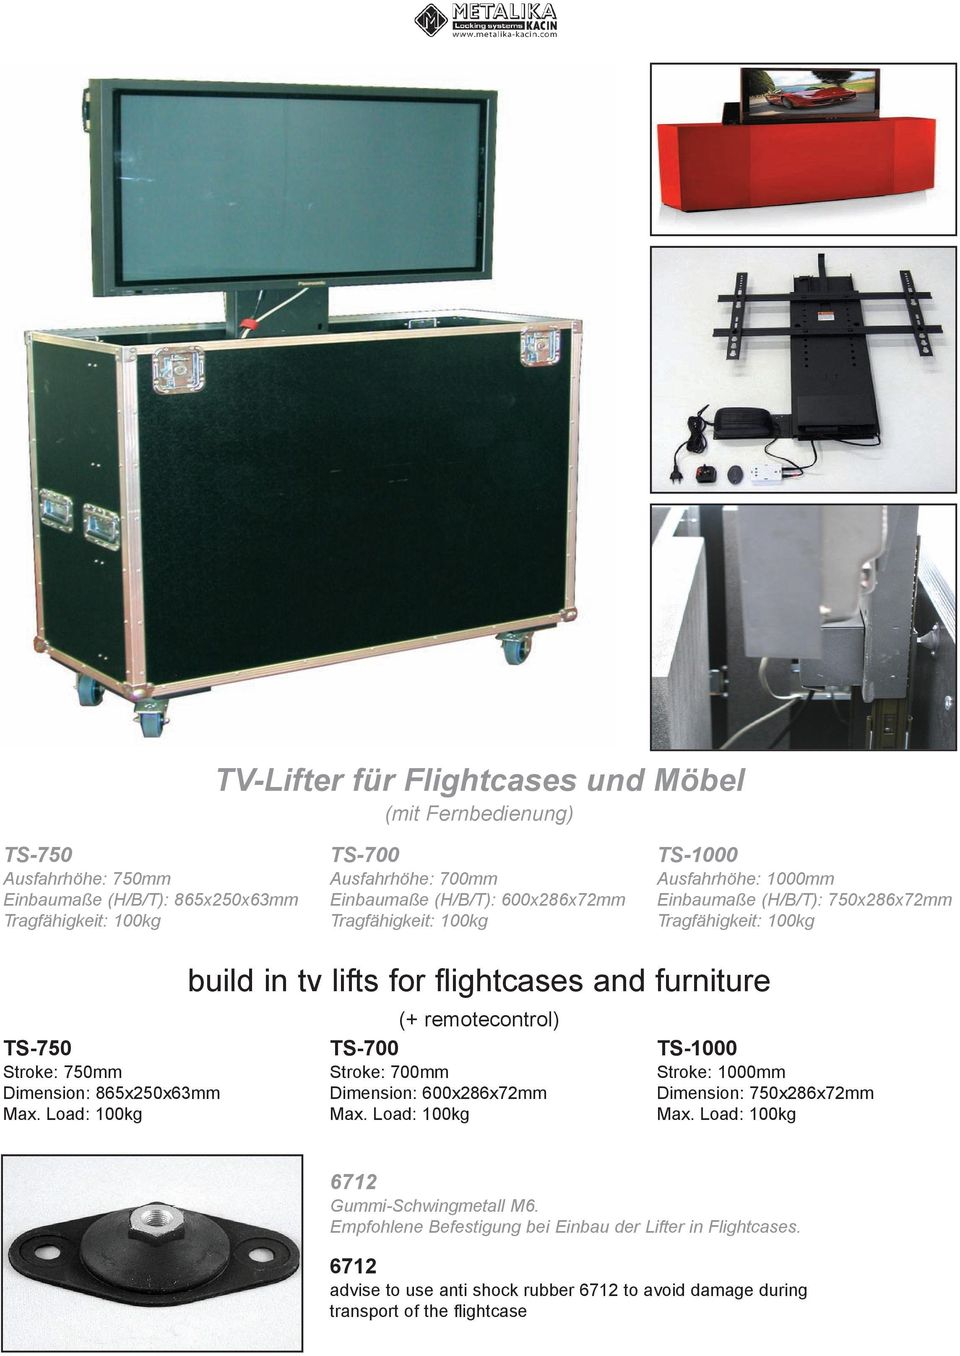 Load: 100kg build in tv lifts for flightcases and furniture (+ remotecontrol) TS-700 Stroke: 700mm Dimension: 600x286x72mm Max.